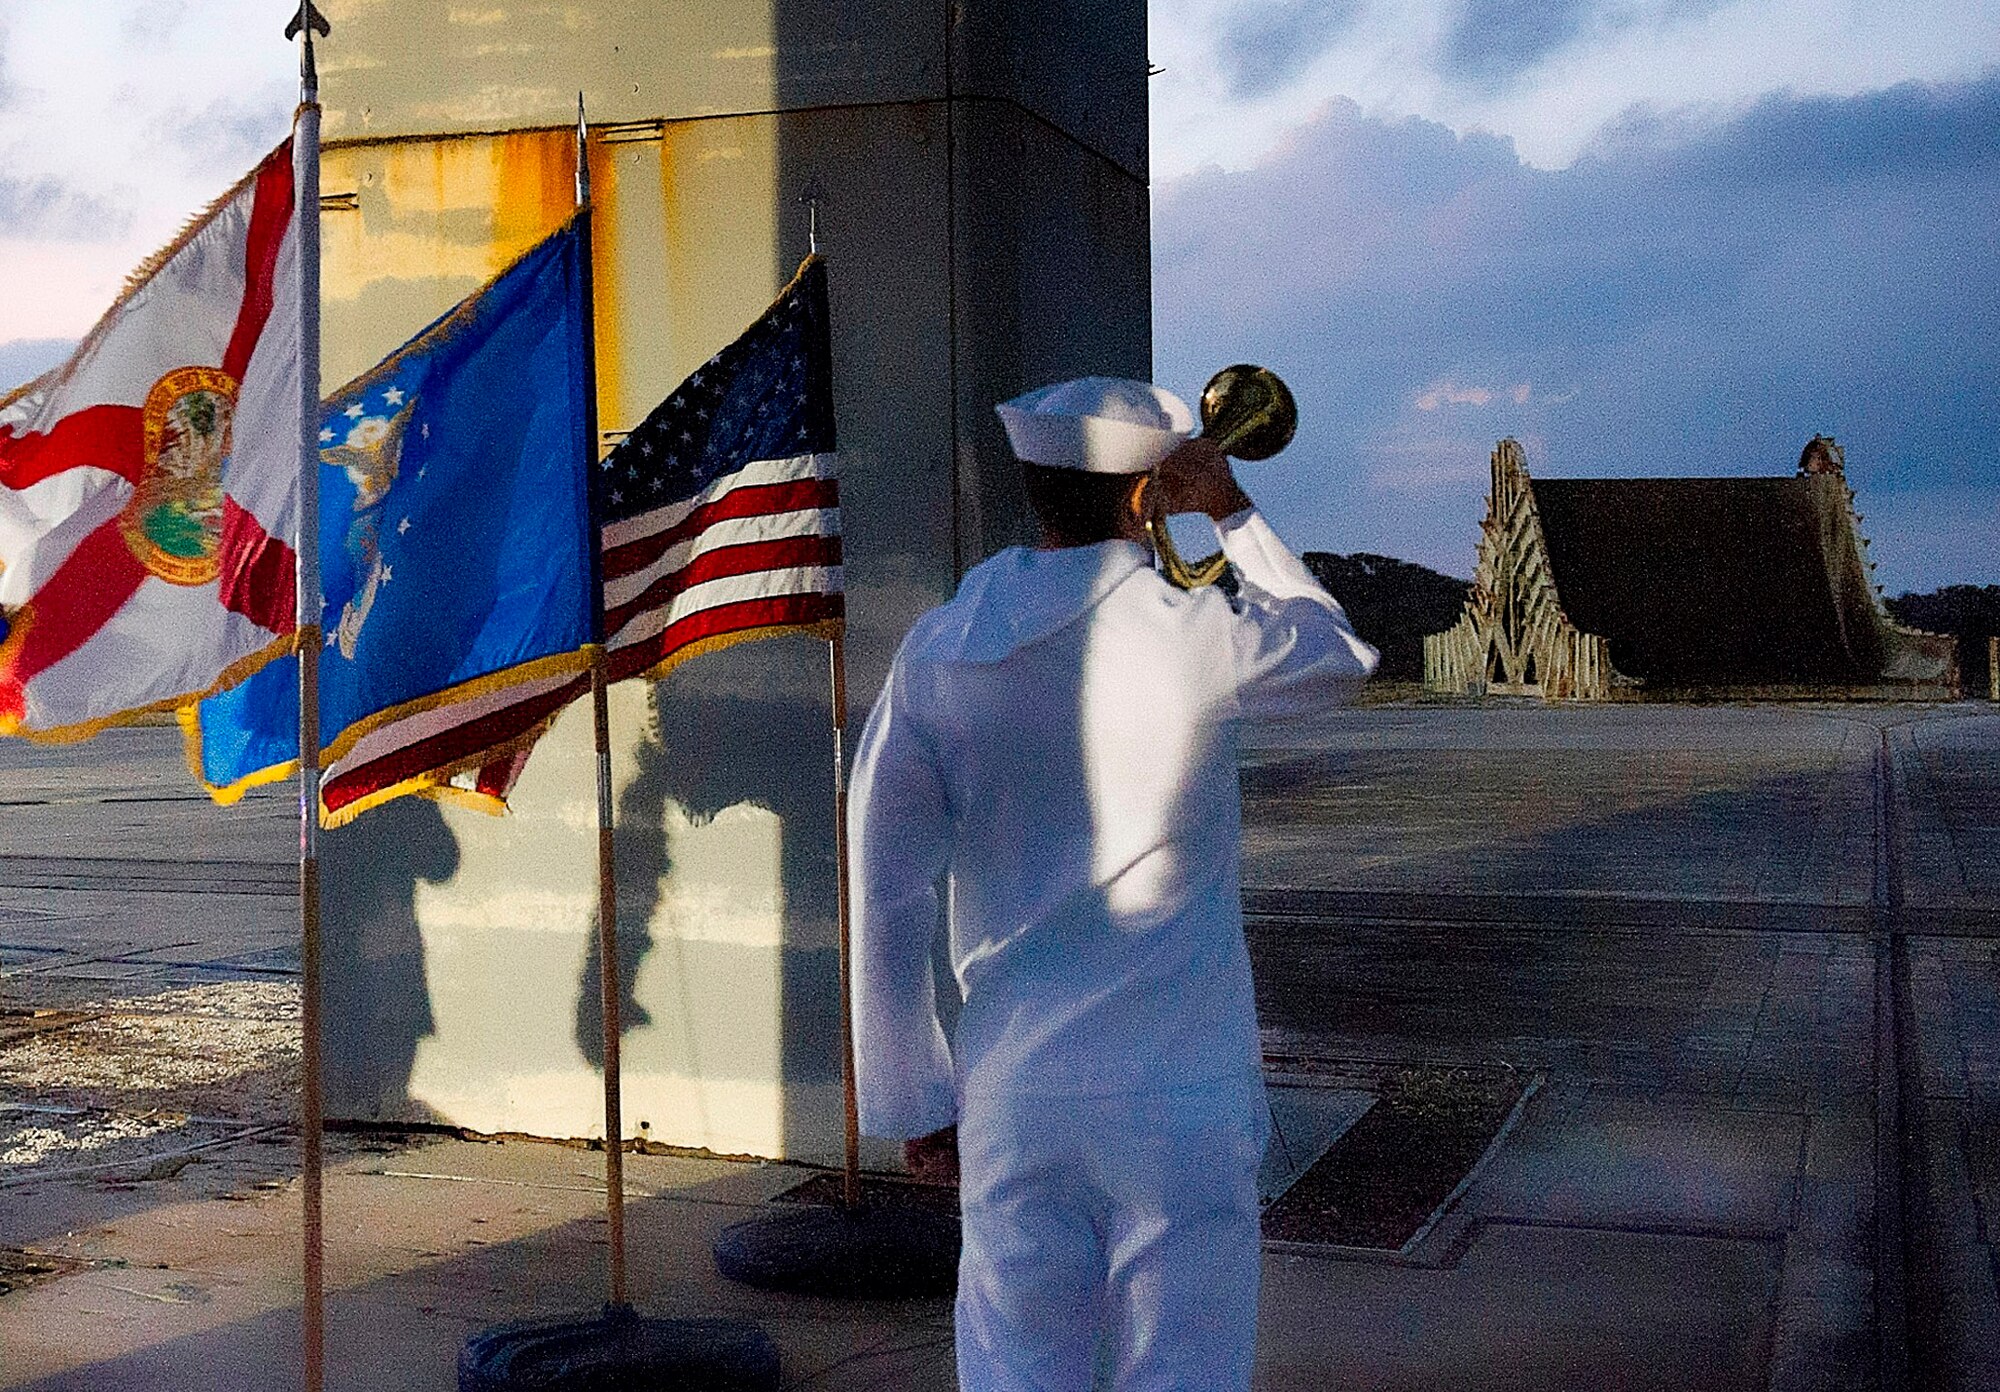 At exactly 6:31 p.m., a bugler from the Naval Ordnance Test Unit plays taps. That is the exact time the flash fire occurred, killing all three astronauts. (U.S. Air Force Photo/ Matthew Jurgens) 
